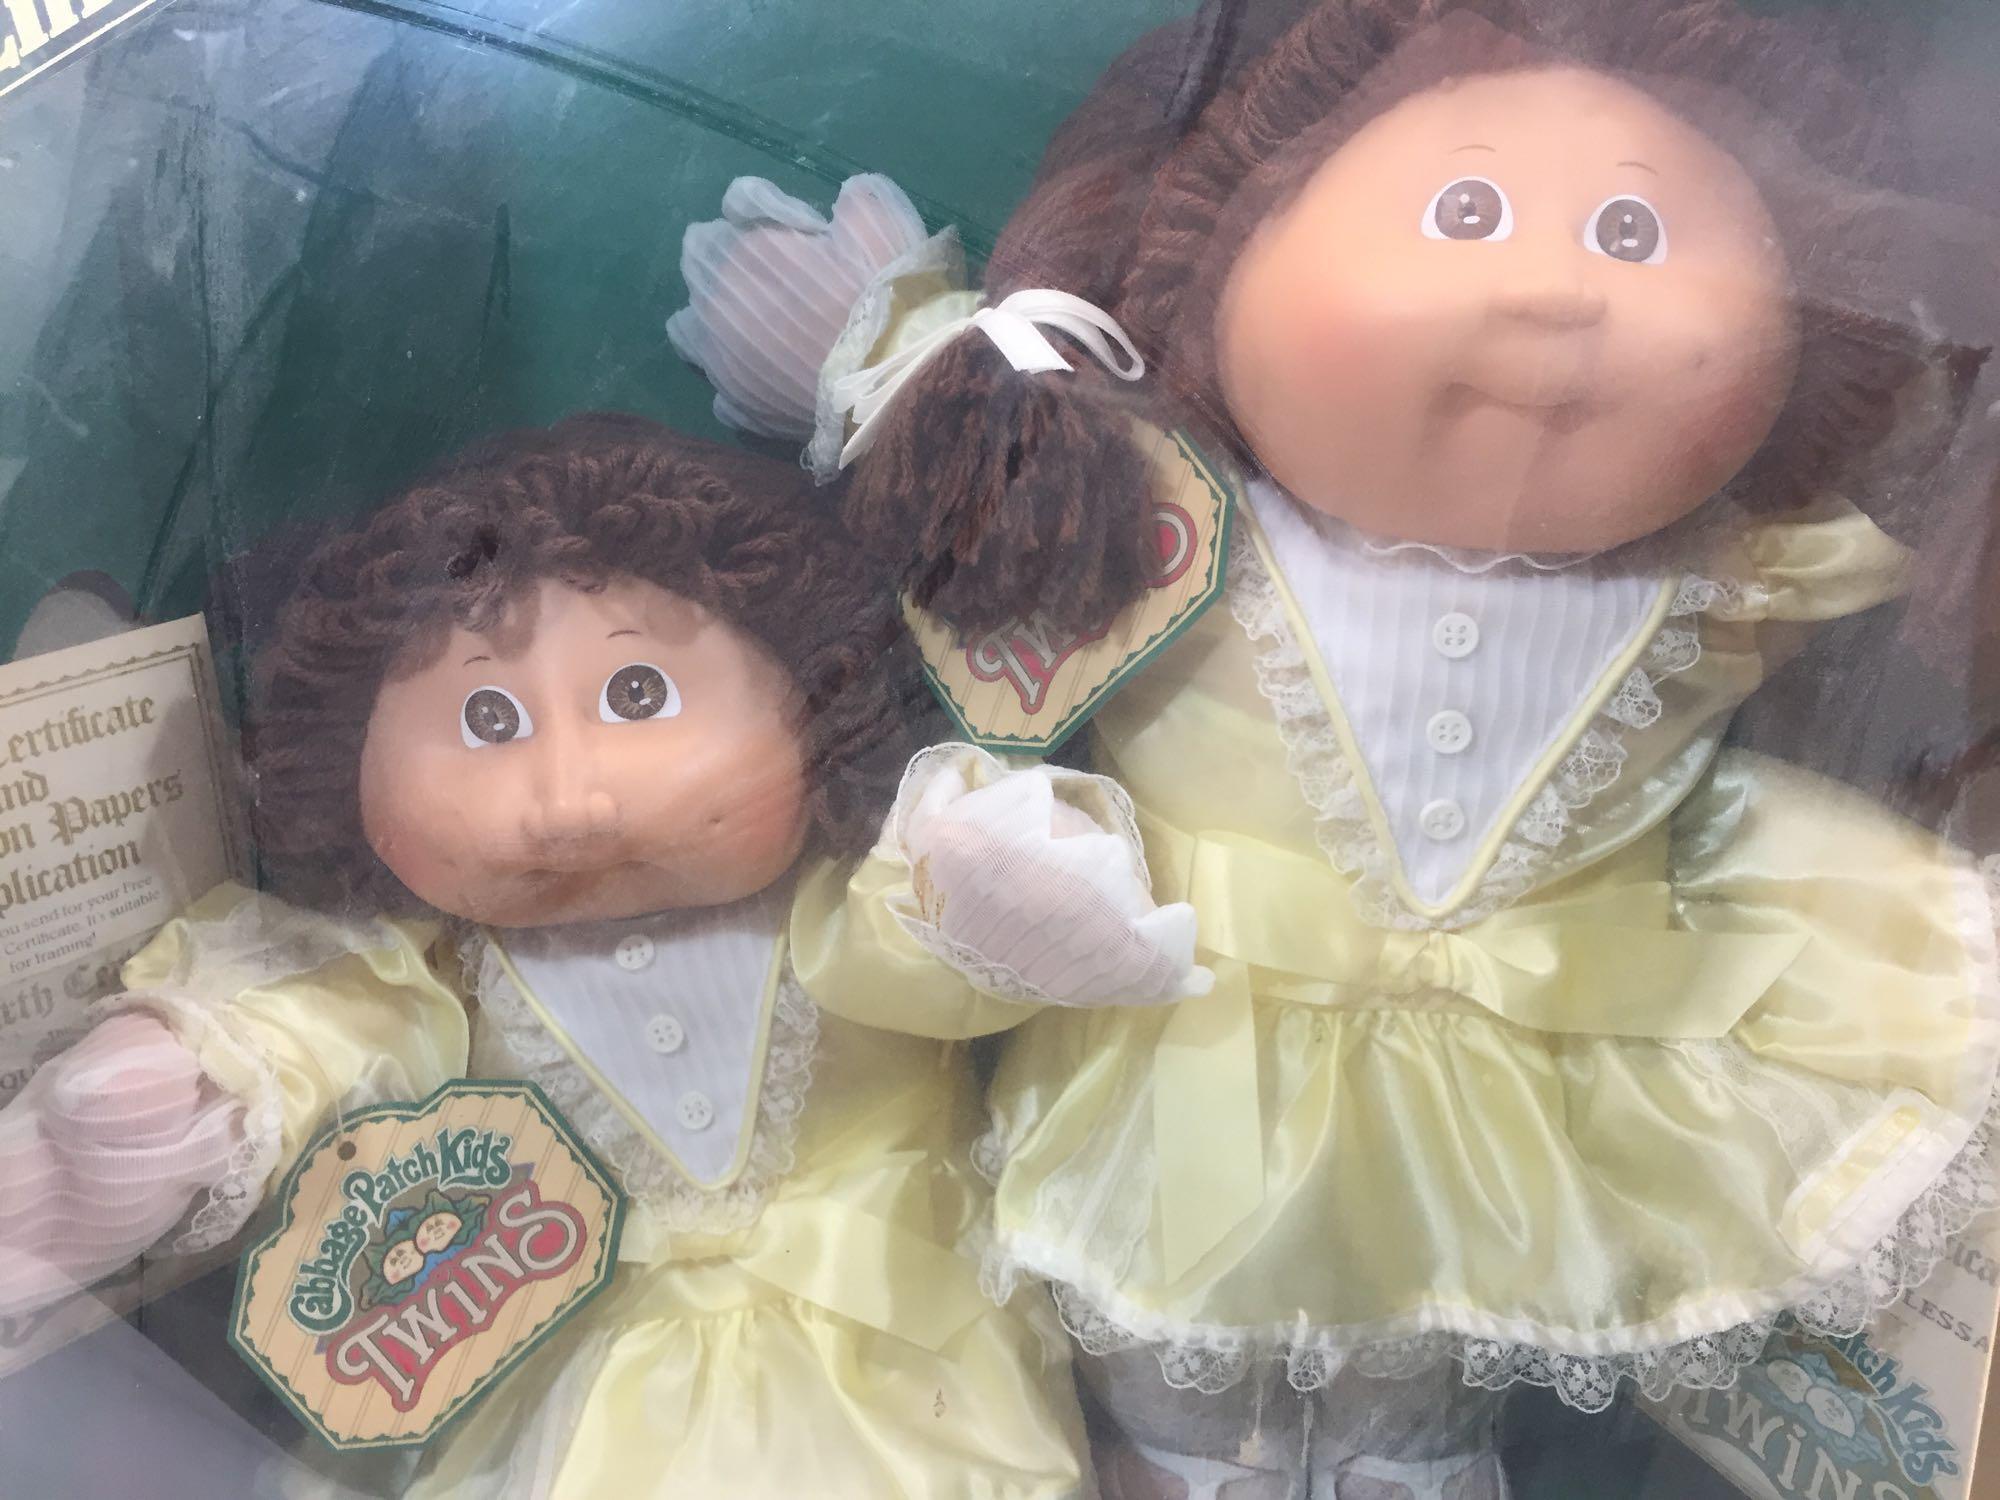 Limited Edition Coleco 1985 Cabbage Patch Kids Twins - 2 Dolls in Original Box 19x19x10in